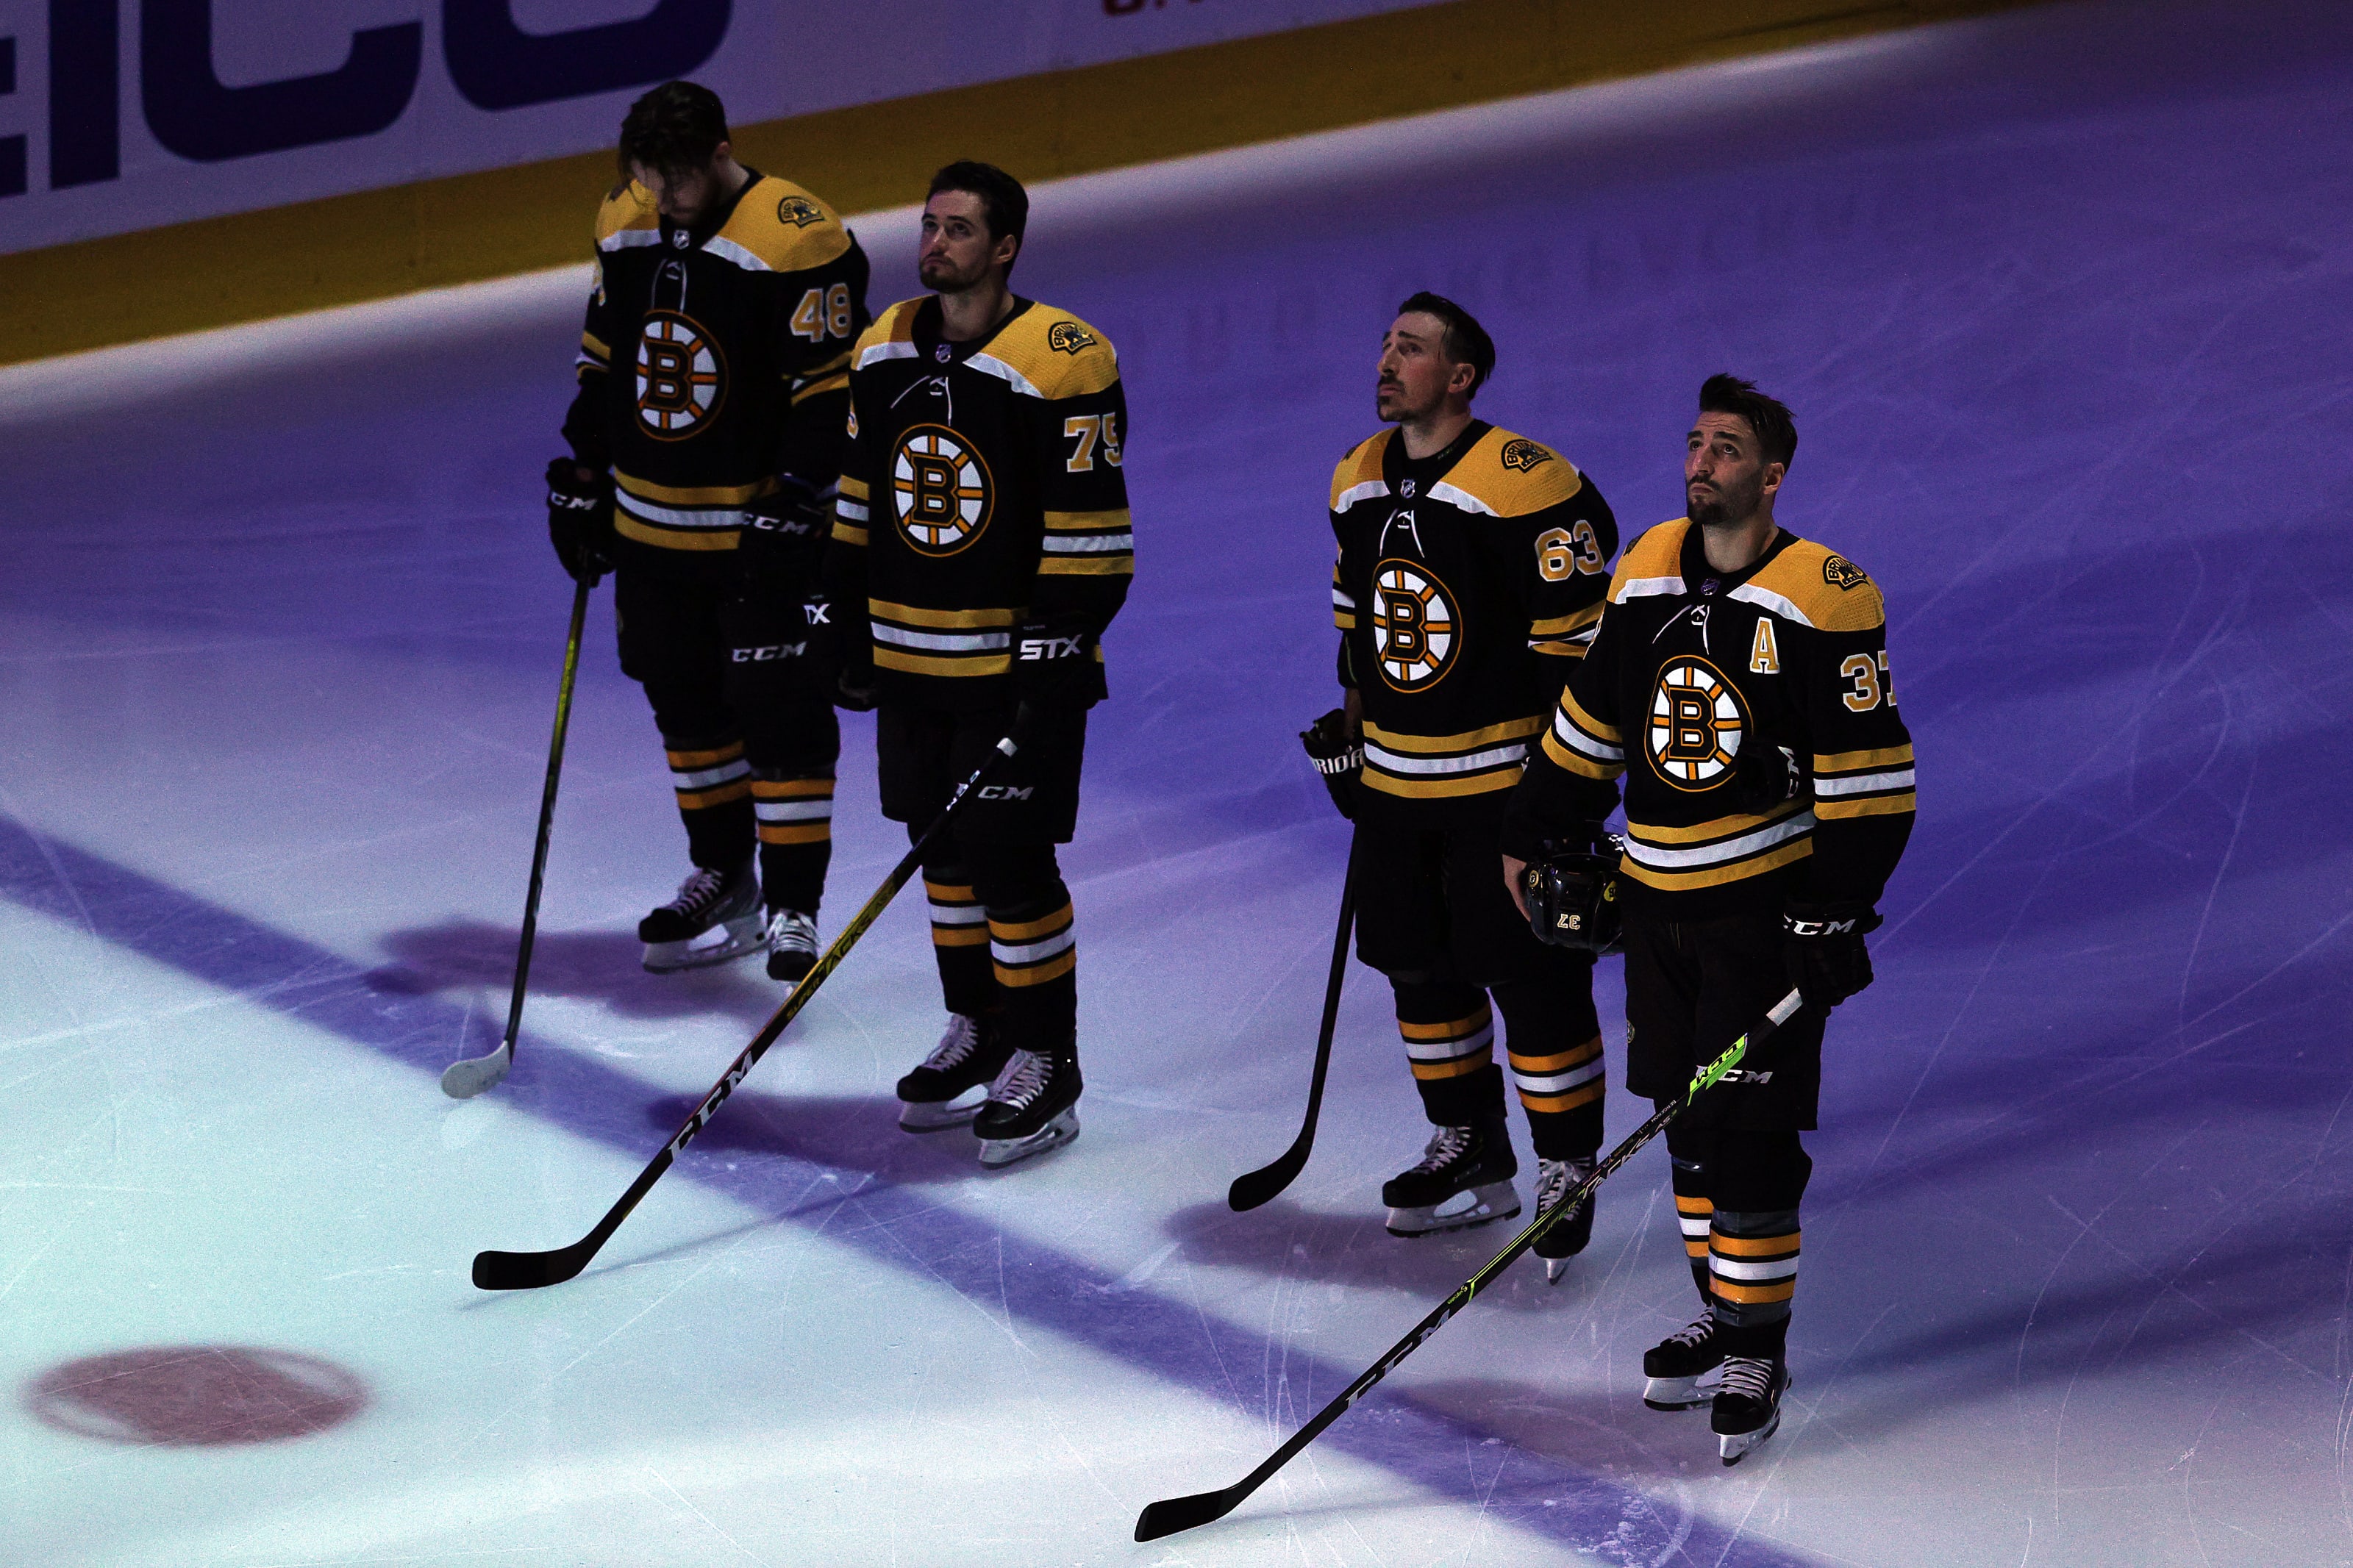 Boston Bruins: The 2020-21 Schedule was Released by the NHL